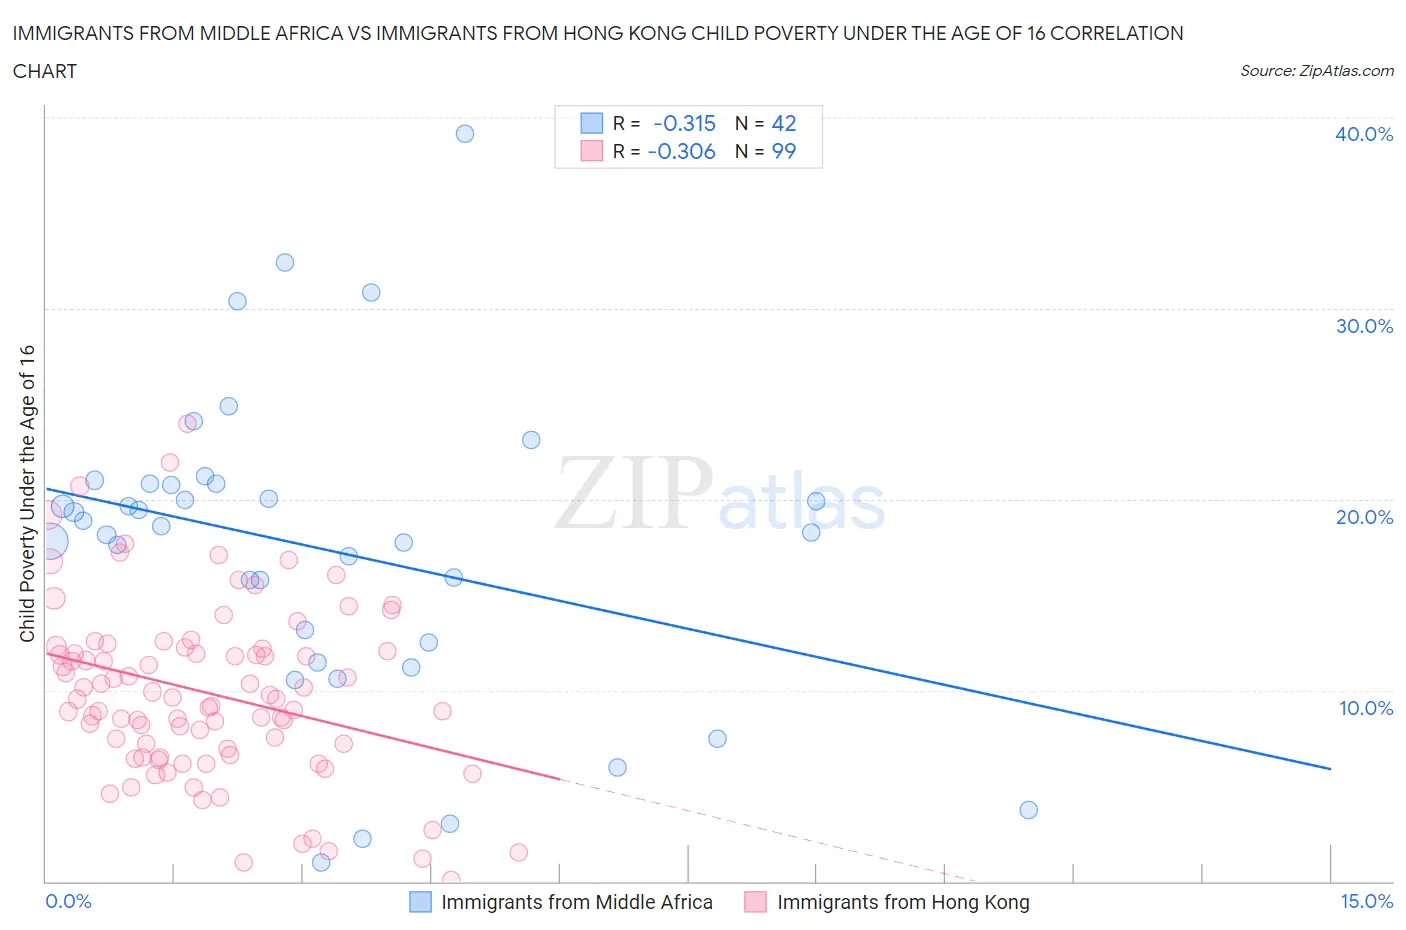 Immigrants from Middle Africa vs Immigrants from Hong Kong Child Poverty Under the Age of 16